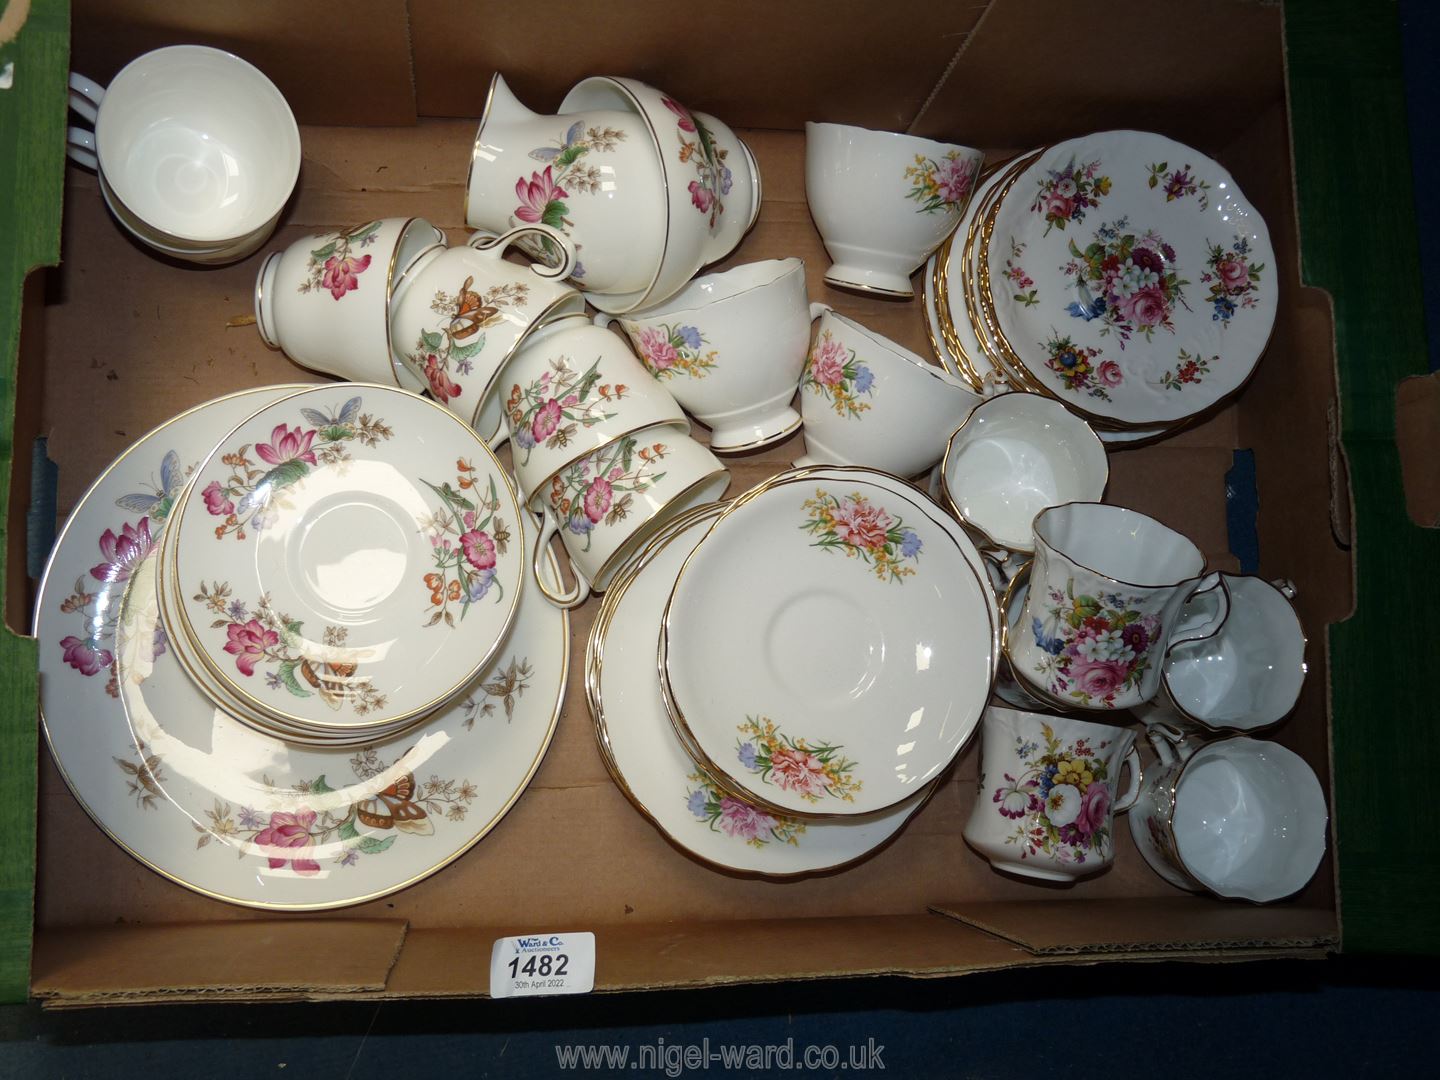 A small quantity of Wedgwood Garden tea set including cake plate, 6 side plates, 6 cups, 6 saucers,